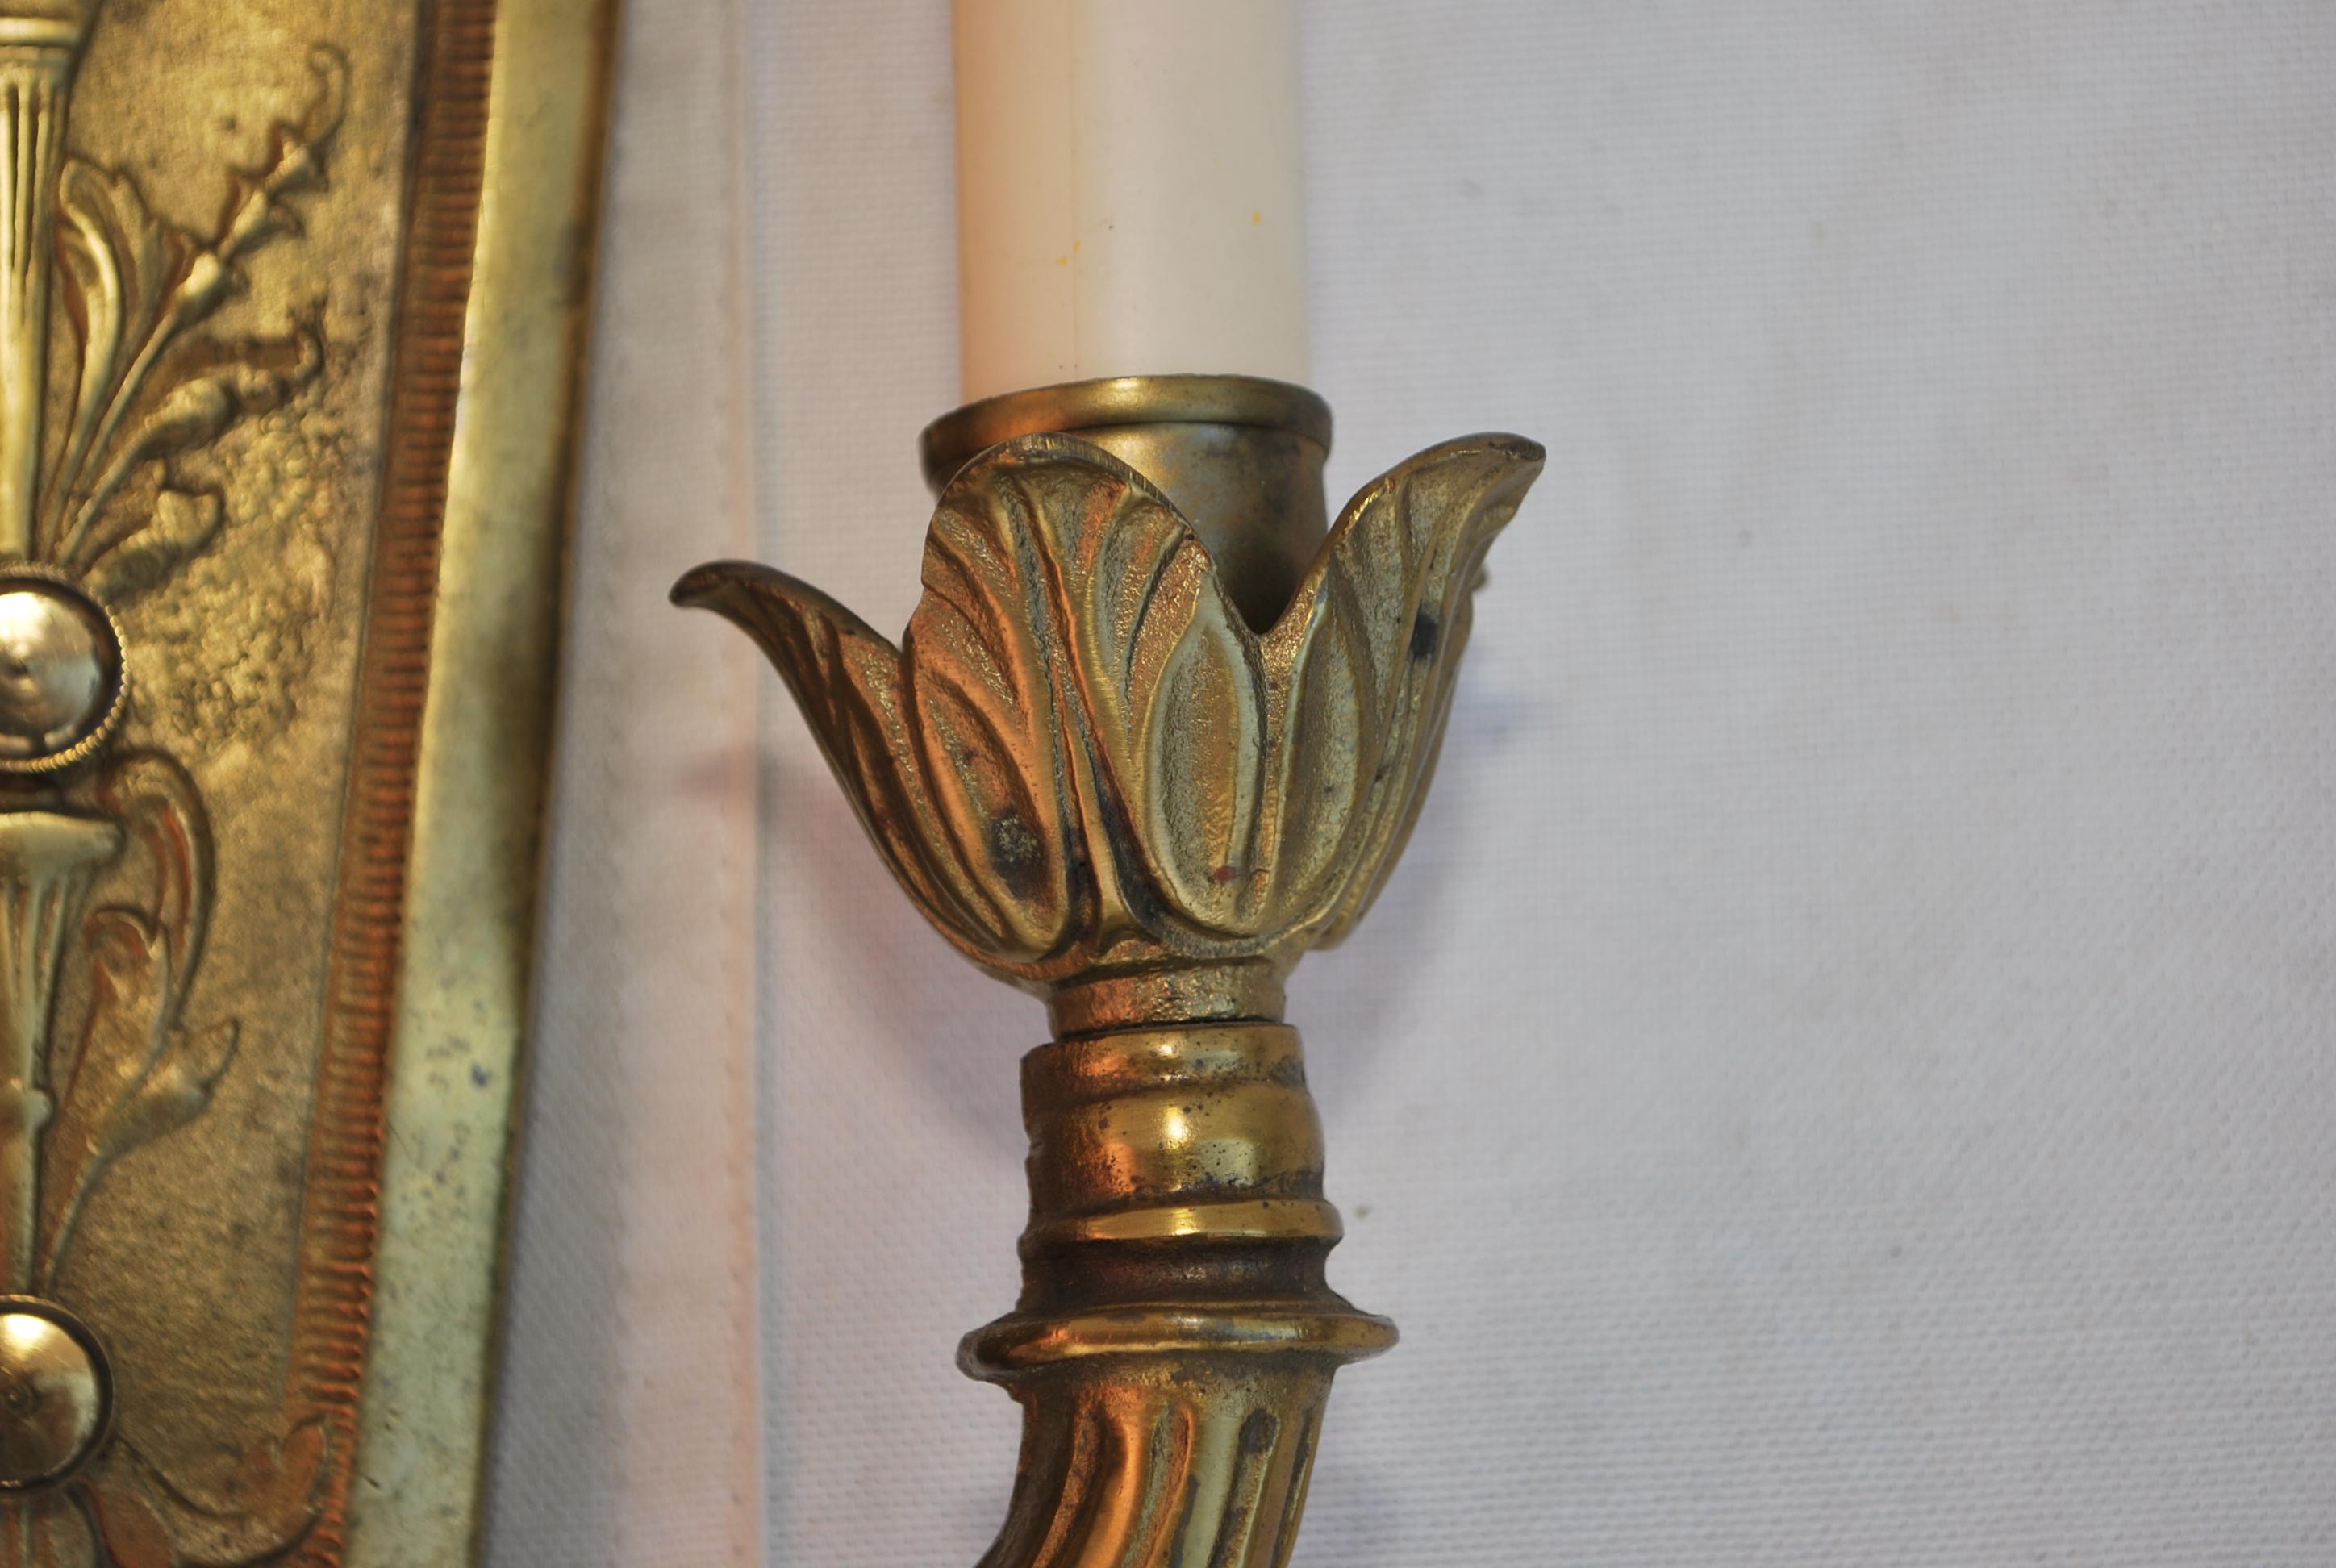 A beautiful pair of 1920's solid brass sconces, the patina is much nicer in person